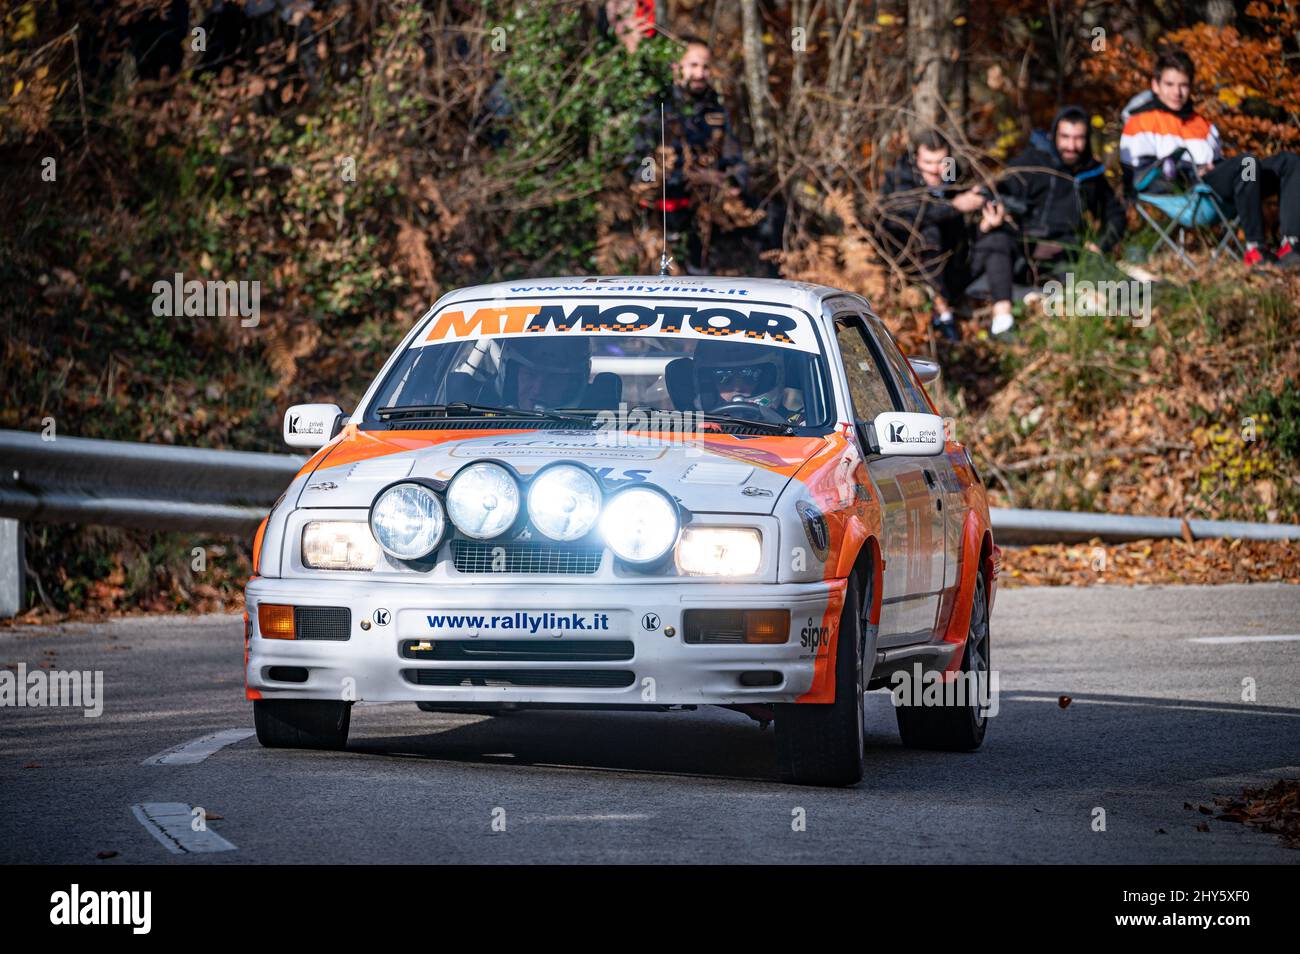 Ford Sierra RS Cosworth at the 69th edition of the Costa Brava rally in San Hilario Sacalm, Spain Stock Photo